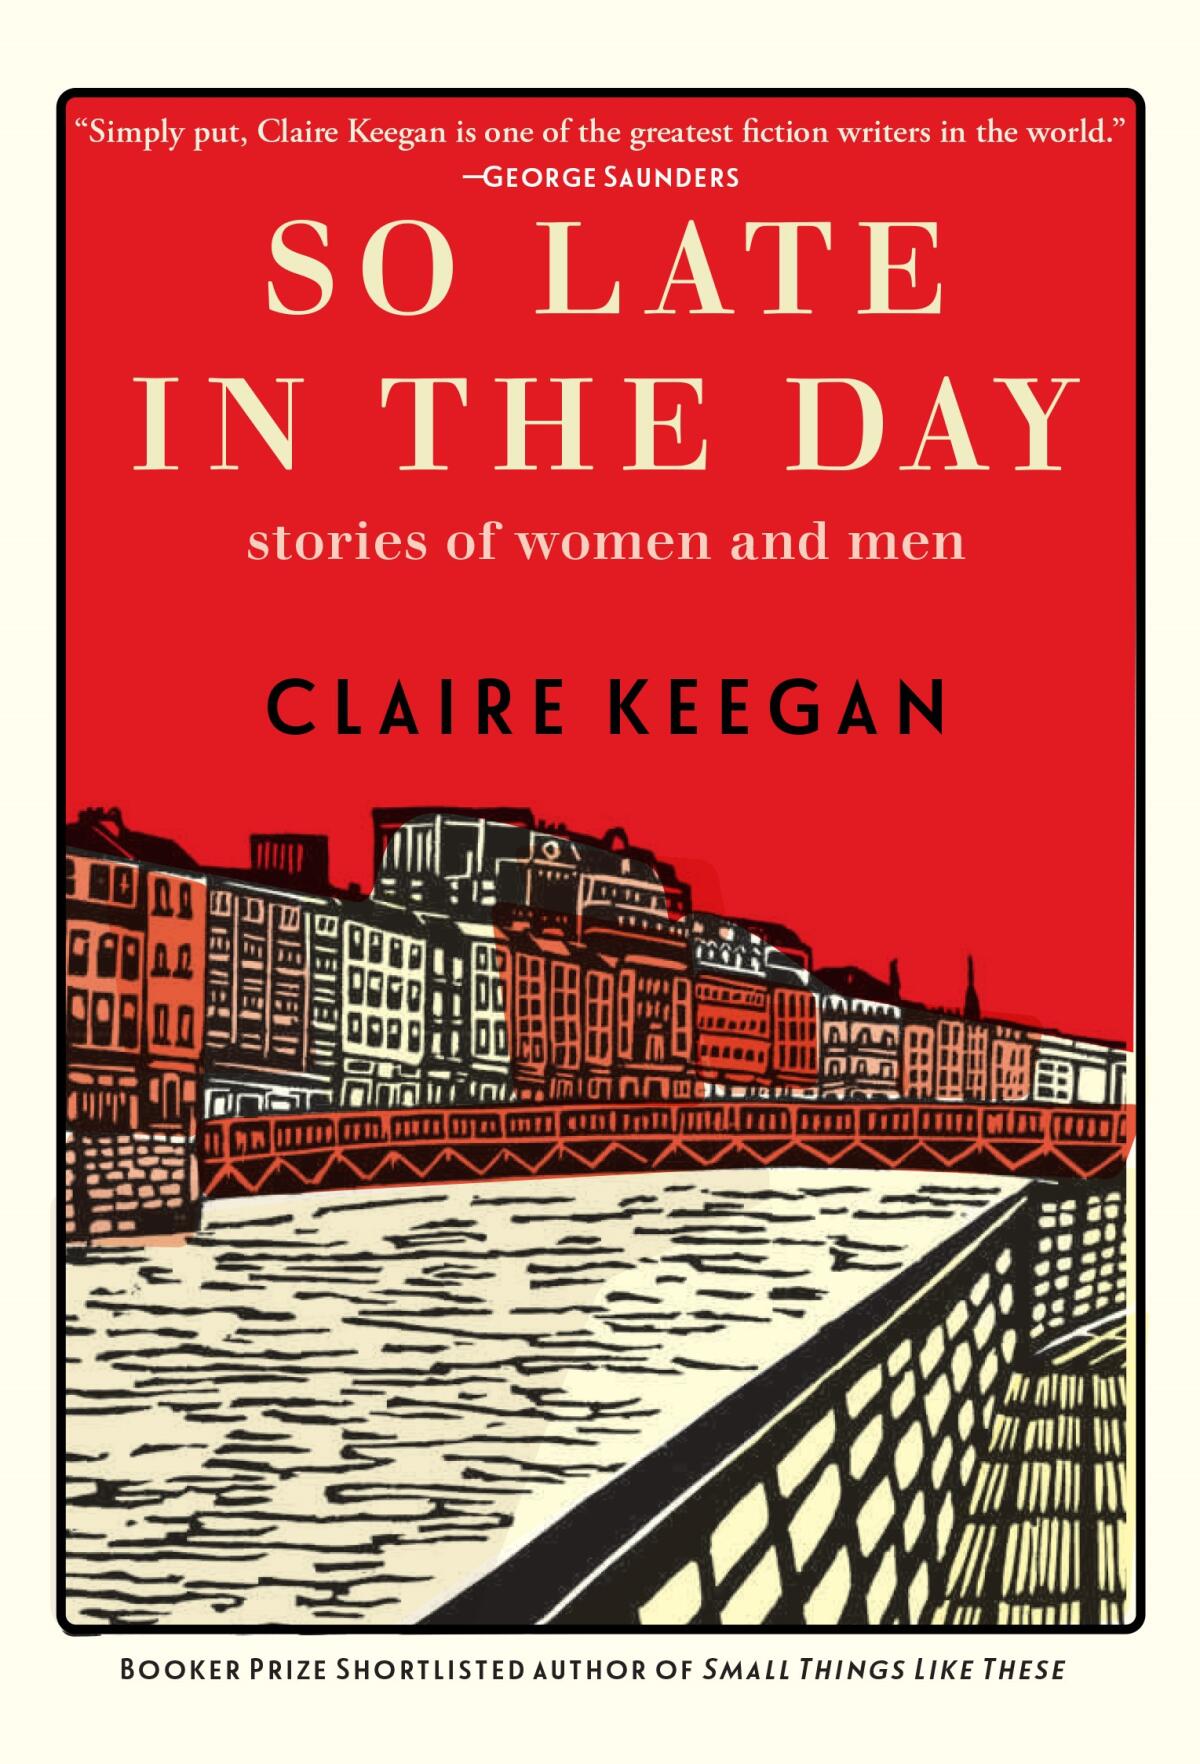 "So Late in the Day," by Claire Keegan